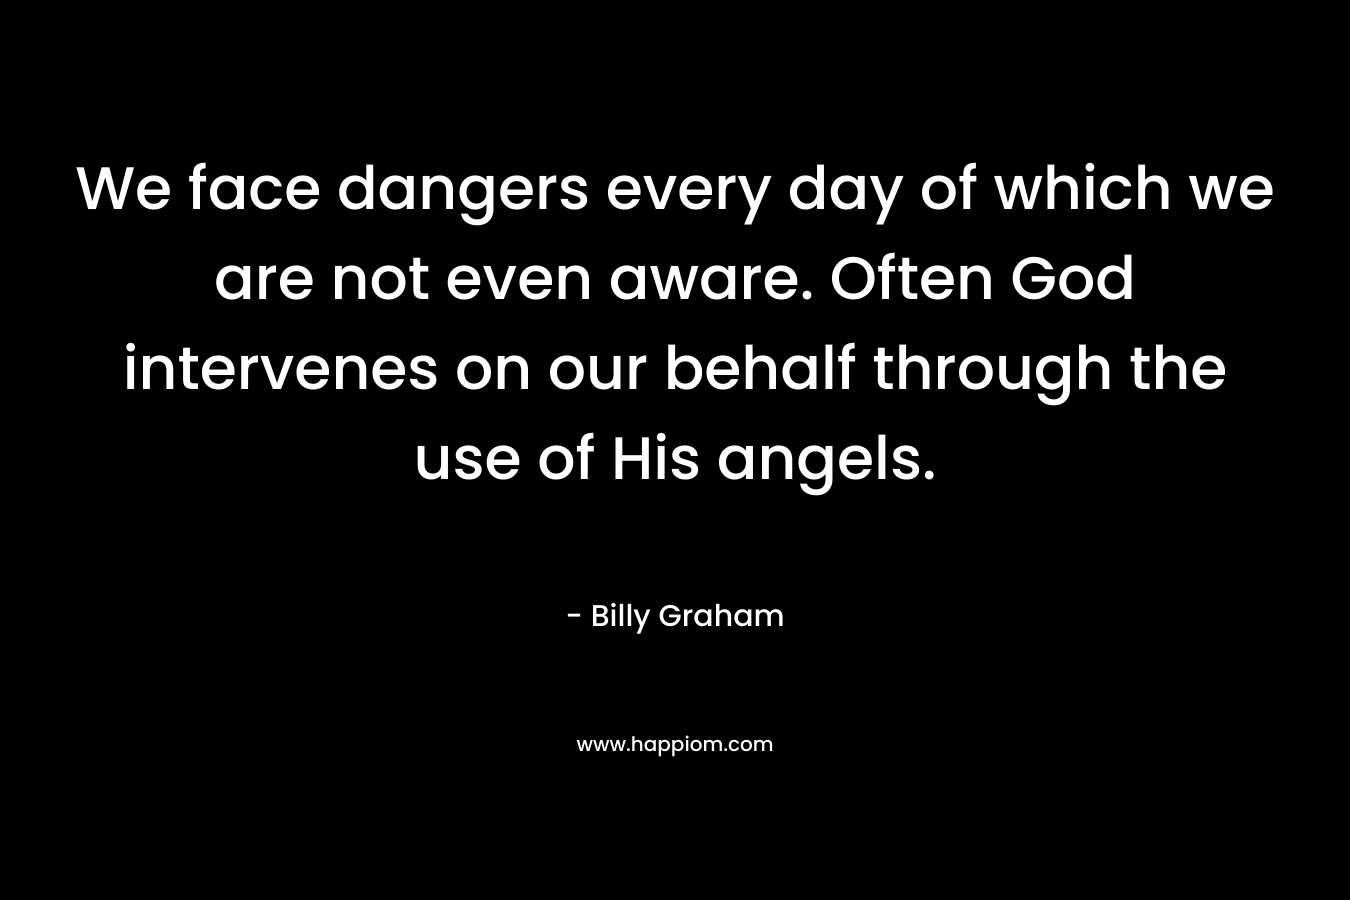 We face dangers every day of which we are not even aware. Often God intervenes on our behalf through the use of His angels. – Billy Graham